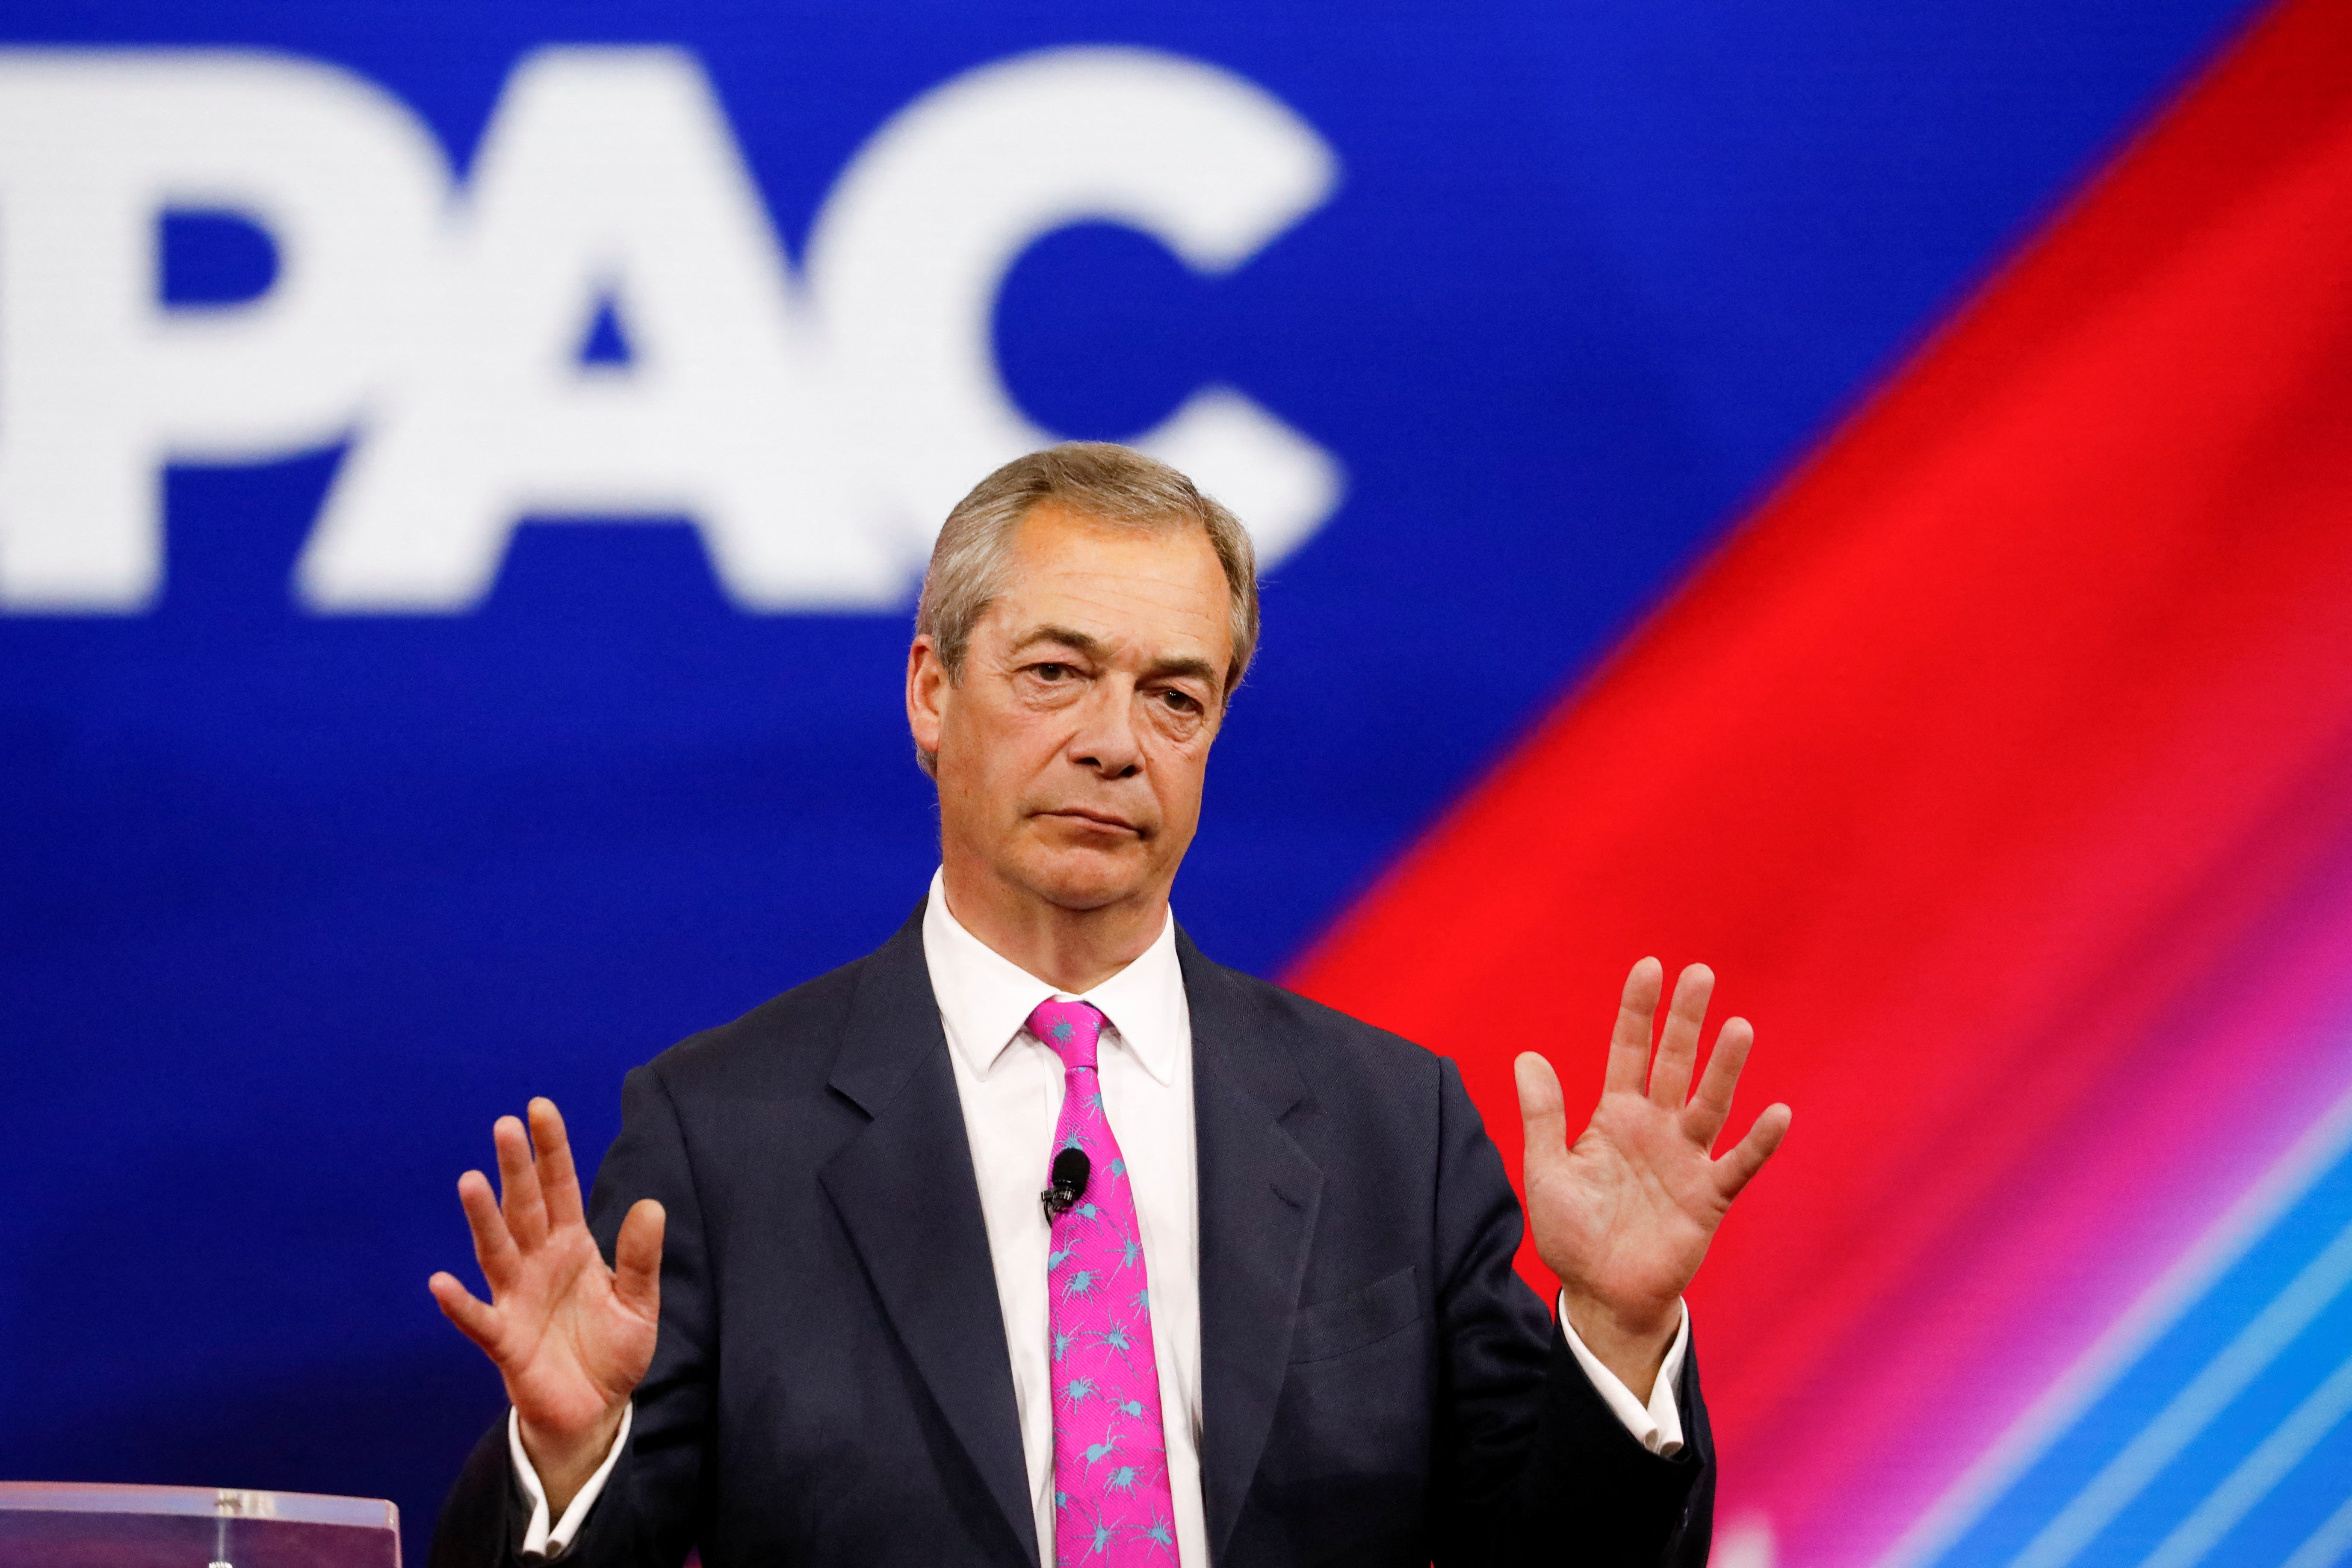 Nigel Farage speaks at the Conservative Political Action Conference in Florida.